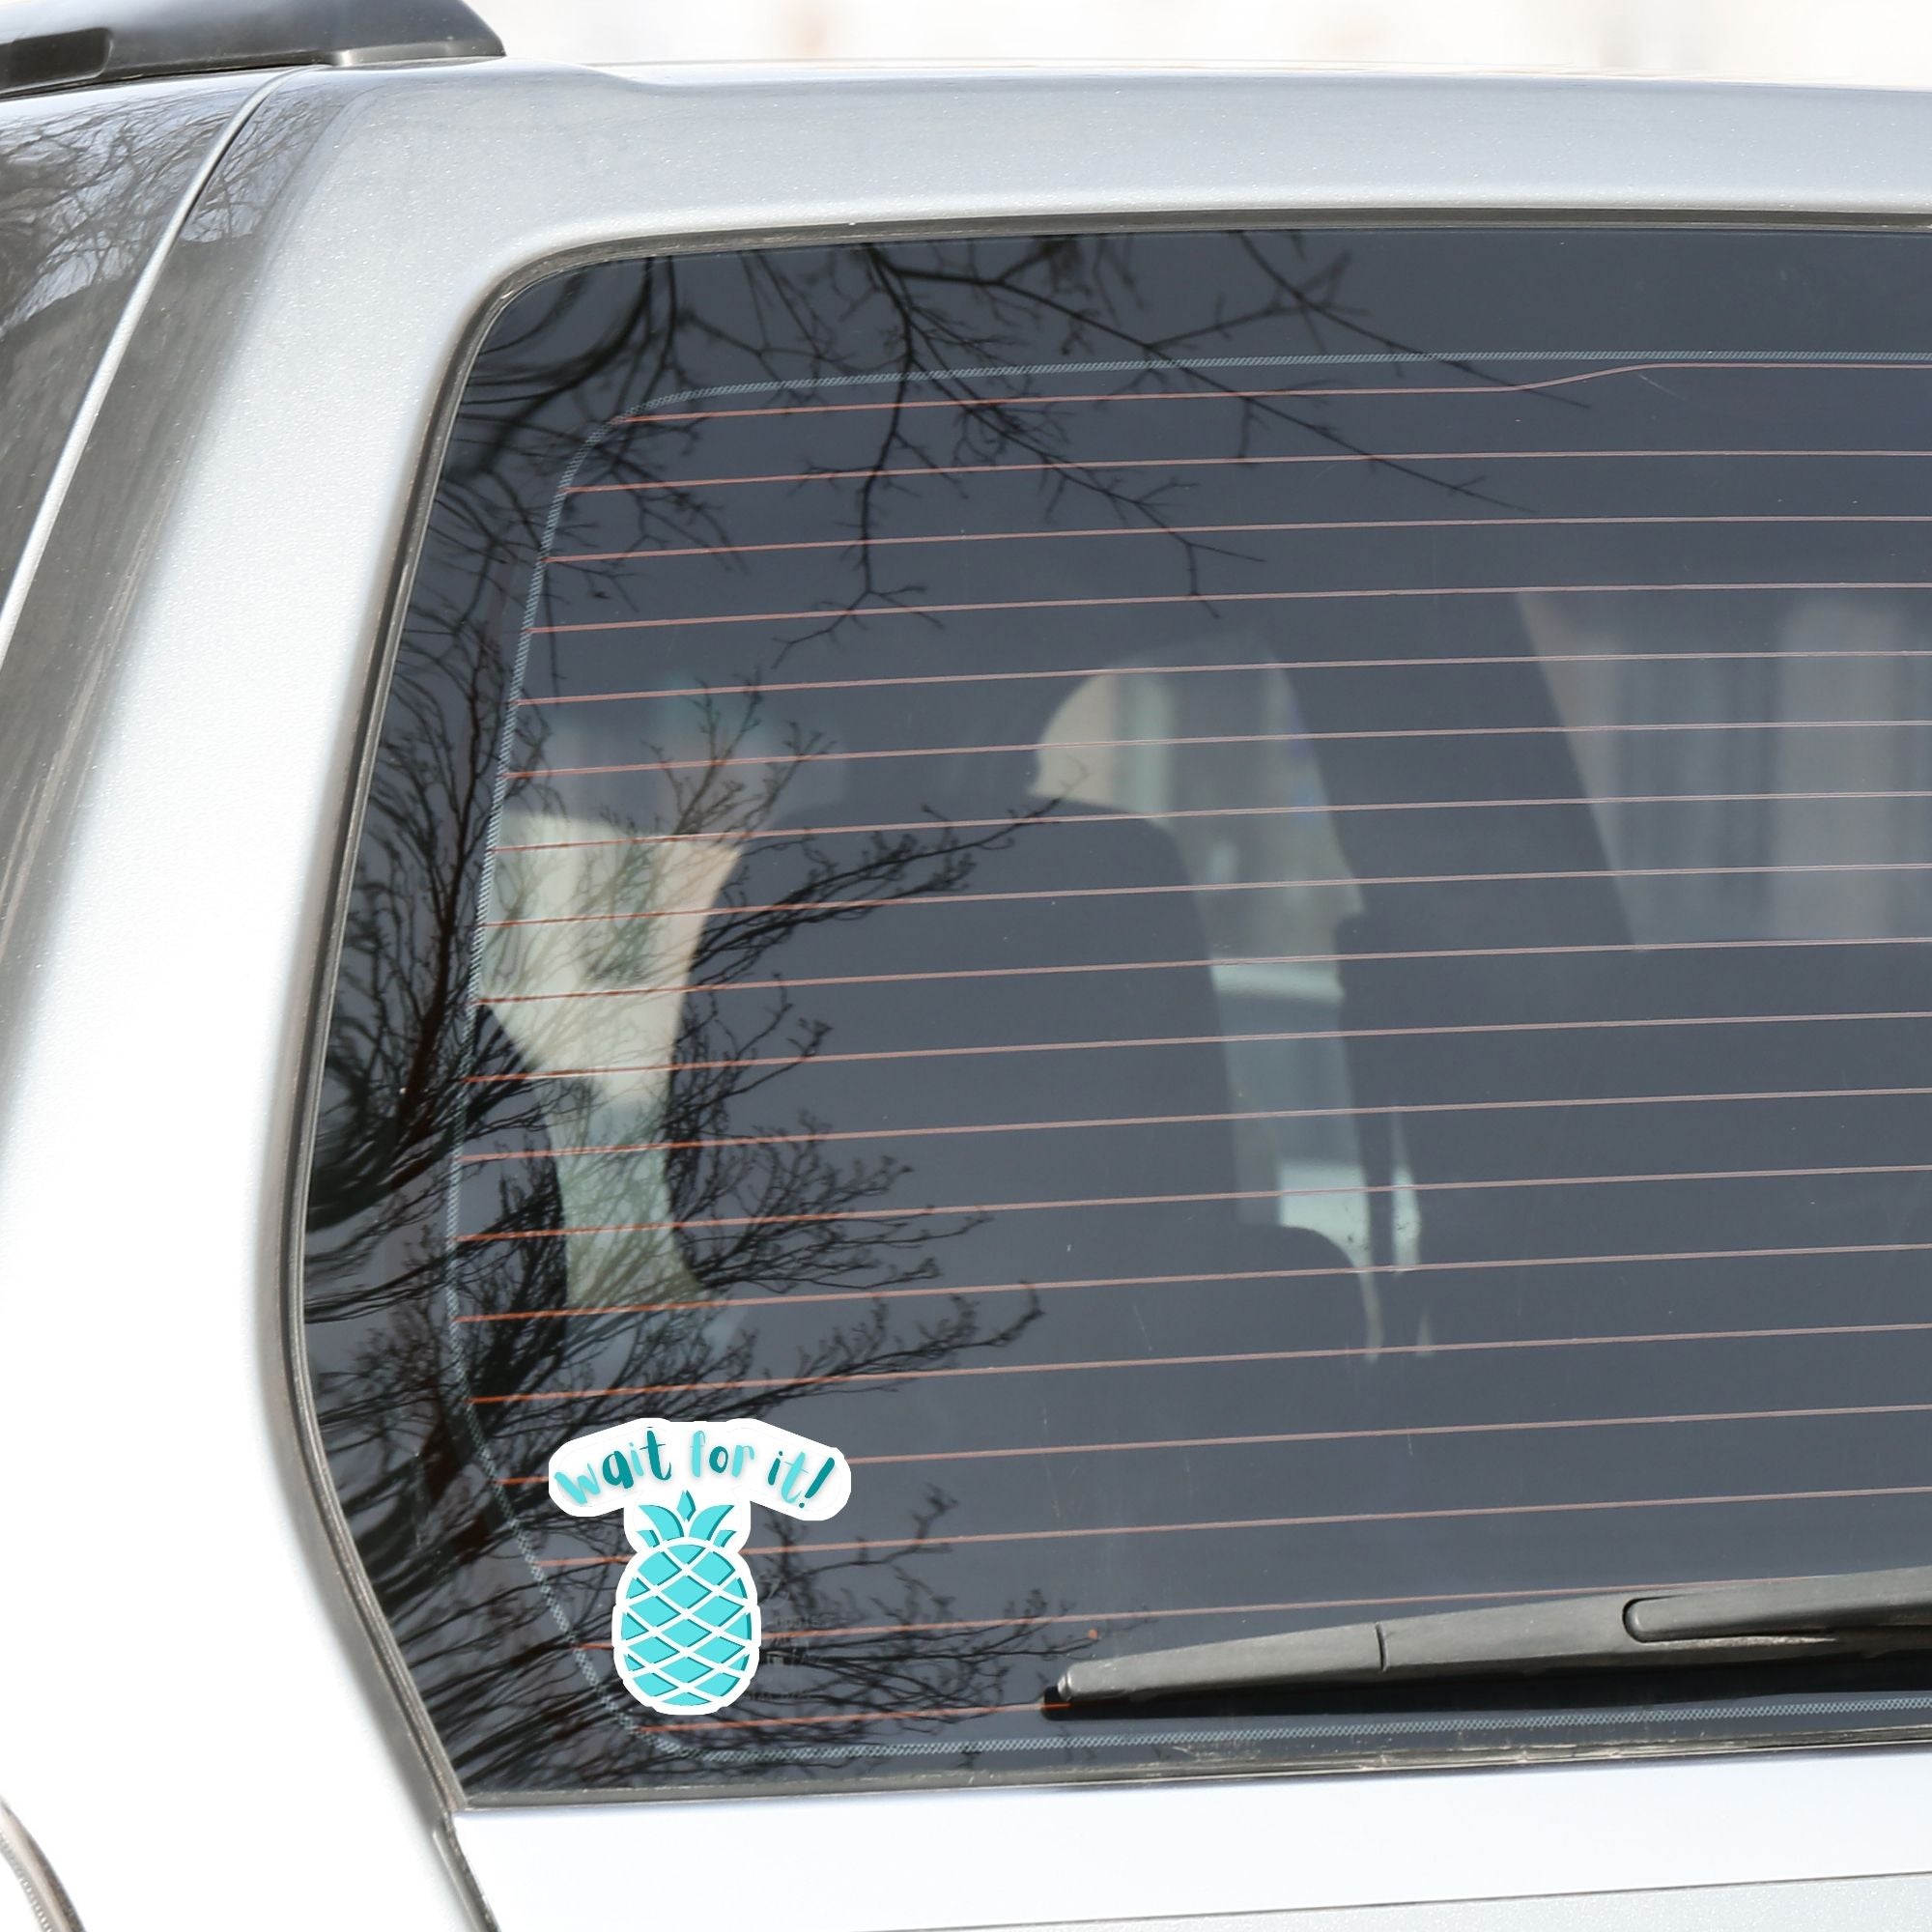 Don't get psyched out by this individual die-cut sticker! It features a teal blue pineapple with the words "Wait for it!" above. This image shows the Wait for it! die-cut sticker on the back window of a car.